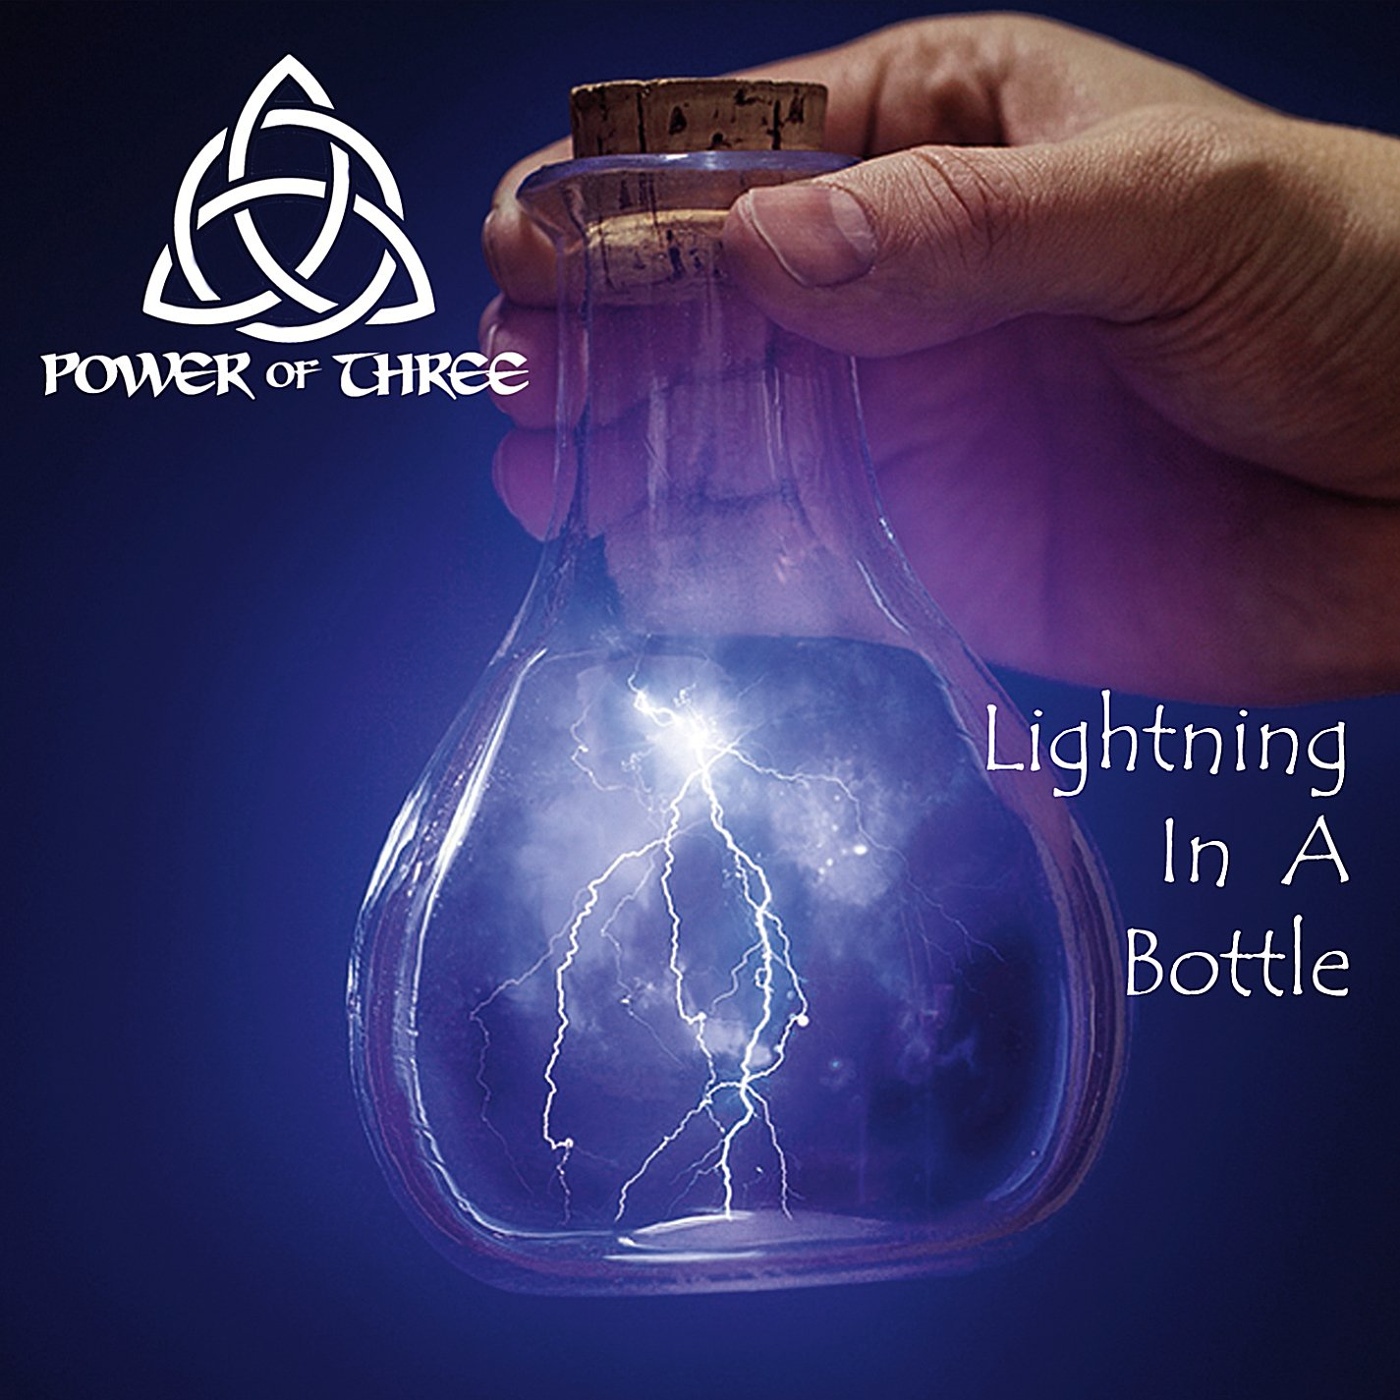 Power of three. Lightning in a Bottle. Find me Lightning in a Bottle. Disney Lightning in a Bottle.